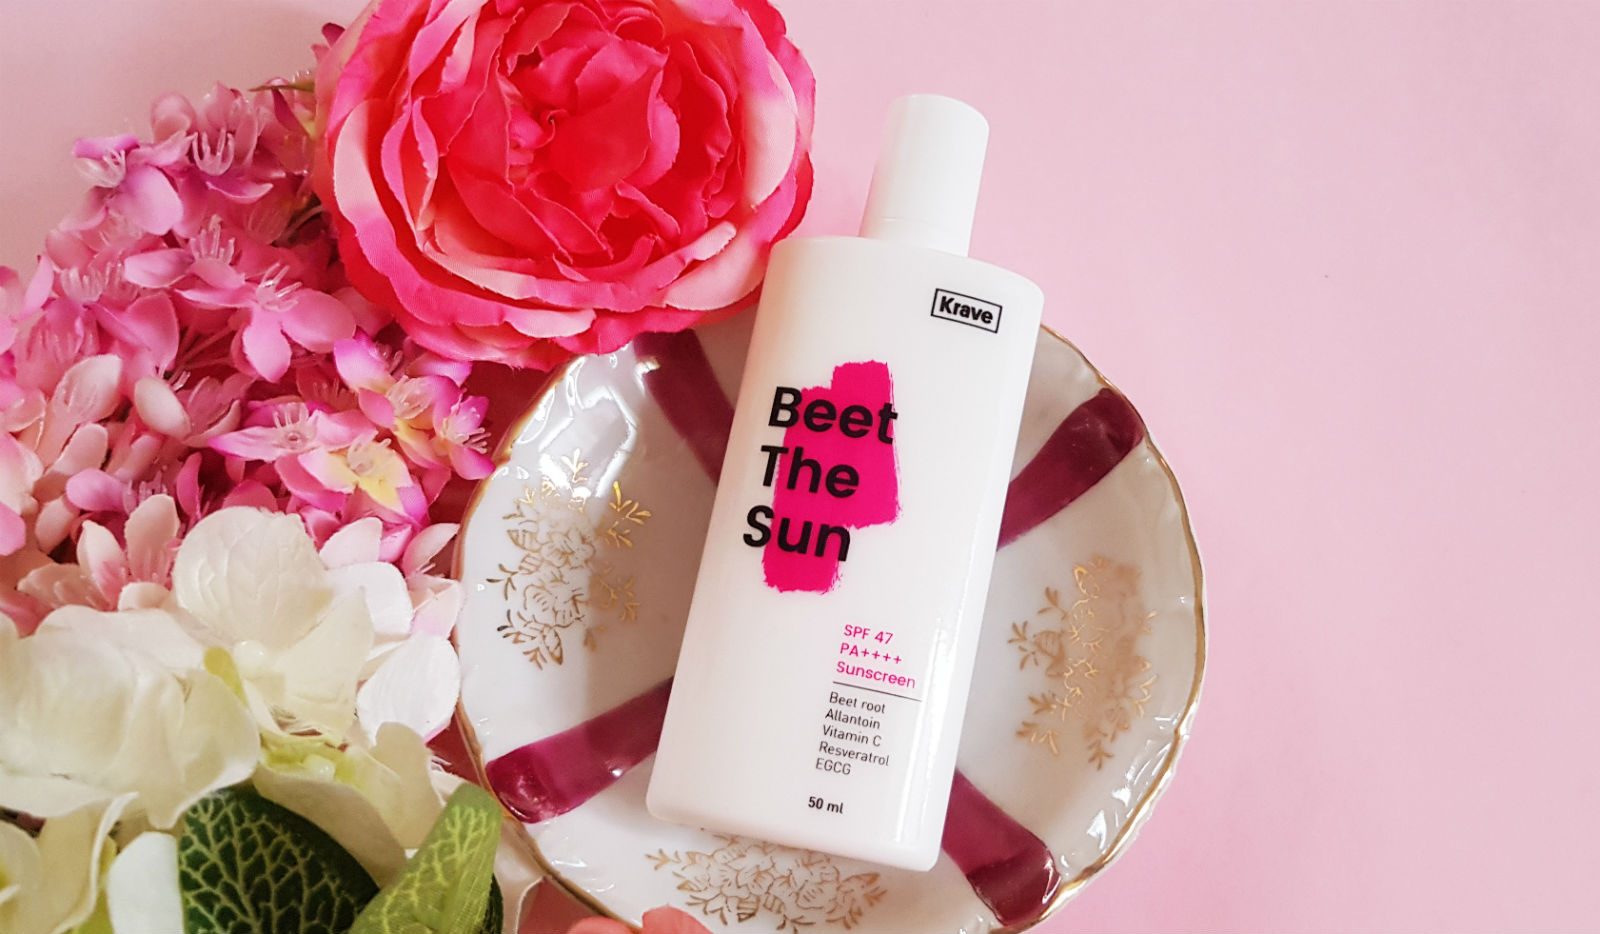 krave beauty beet the sun review | style vanity